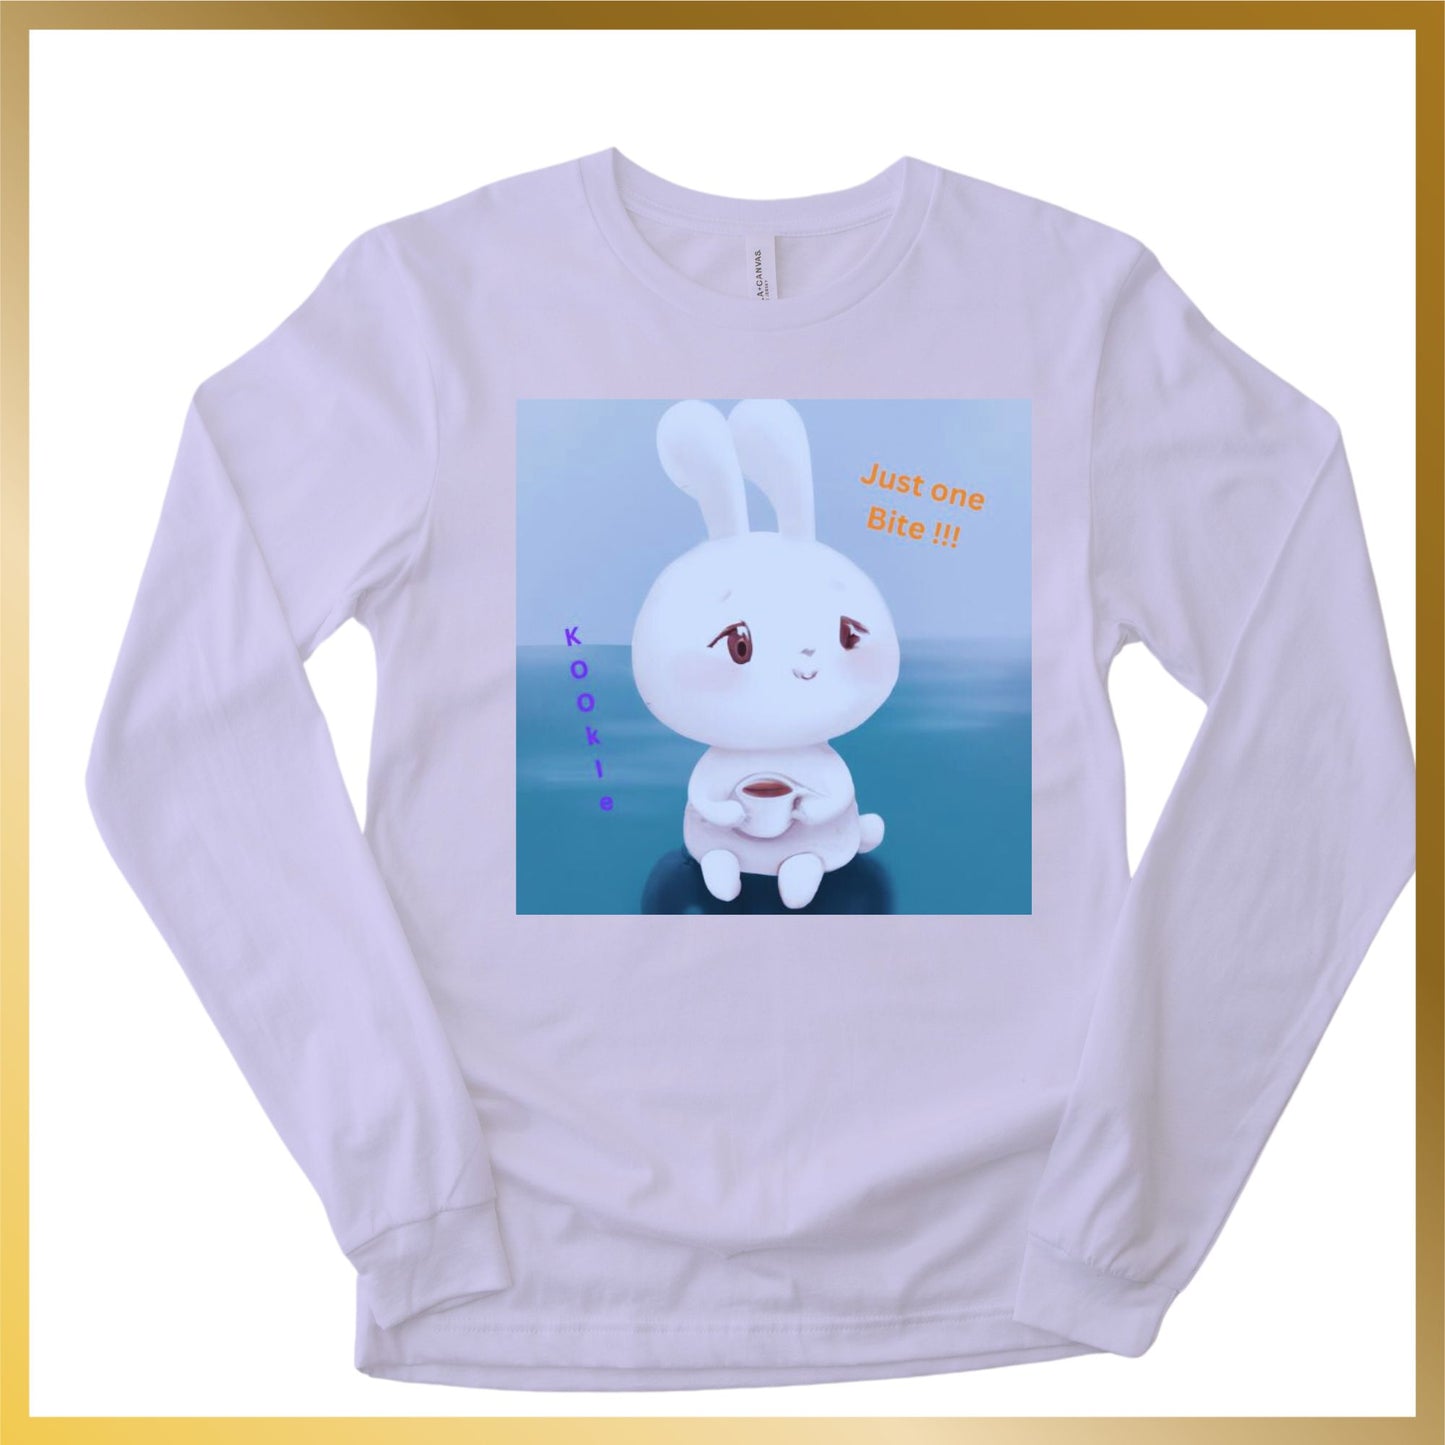 cute snow white bunny said Just one Bite long sleeve white shirt while holding a mug of coffee